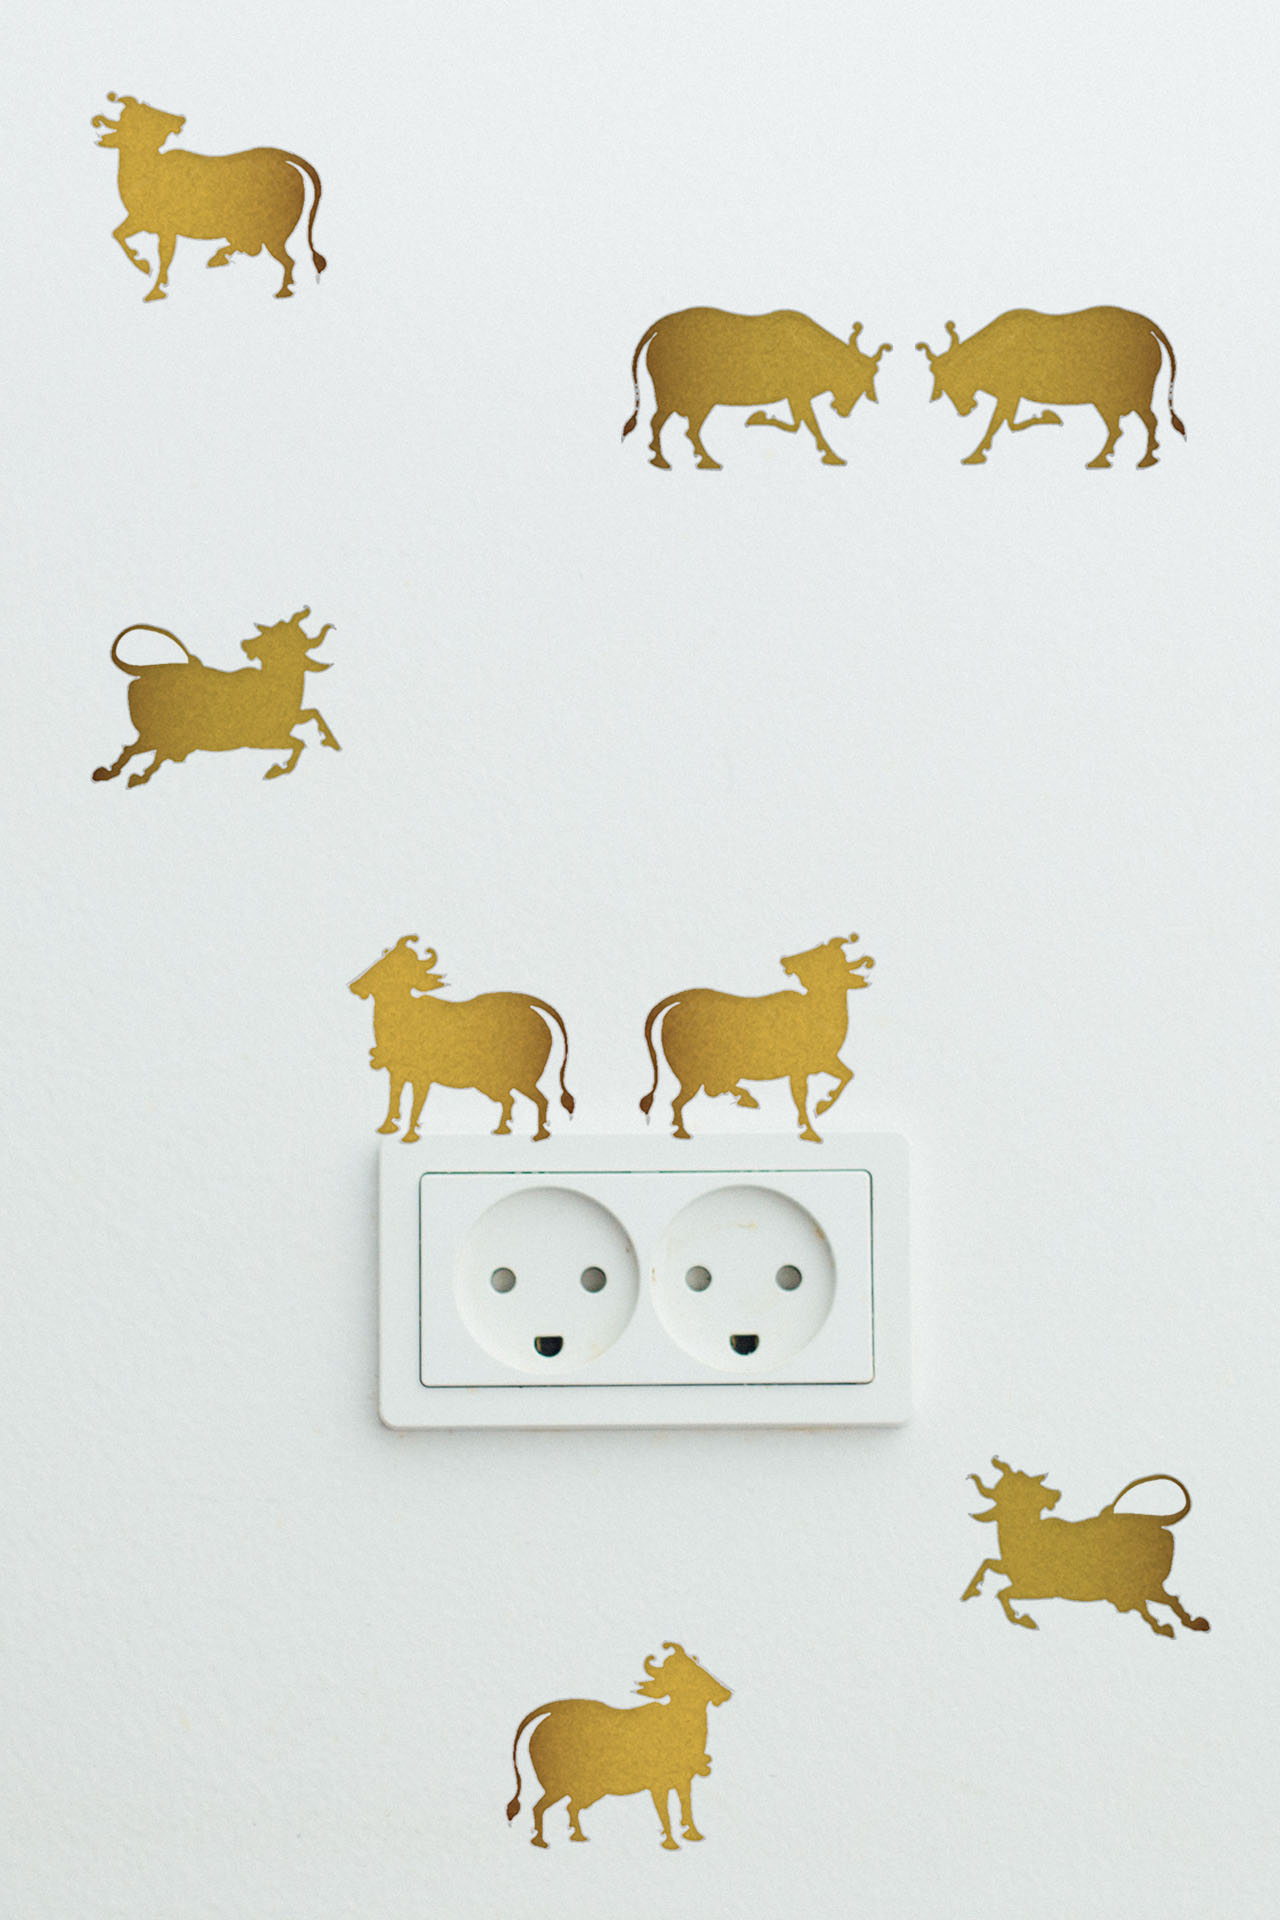 Cows Of Pichwai (Gold) Easy Decal Sets